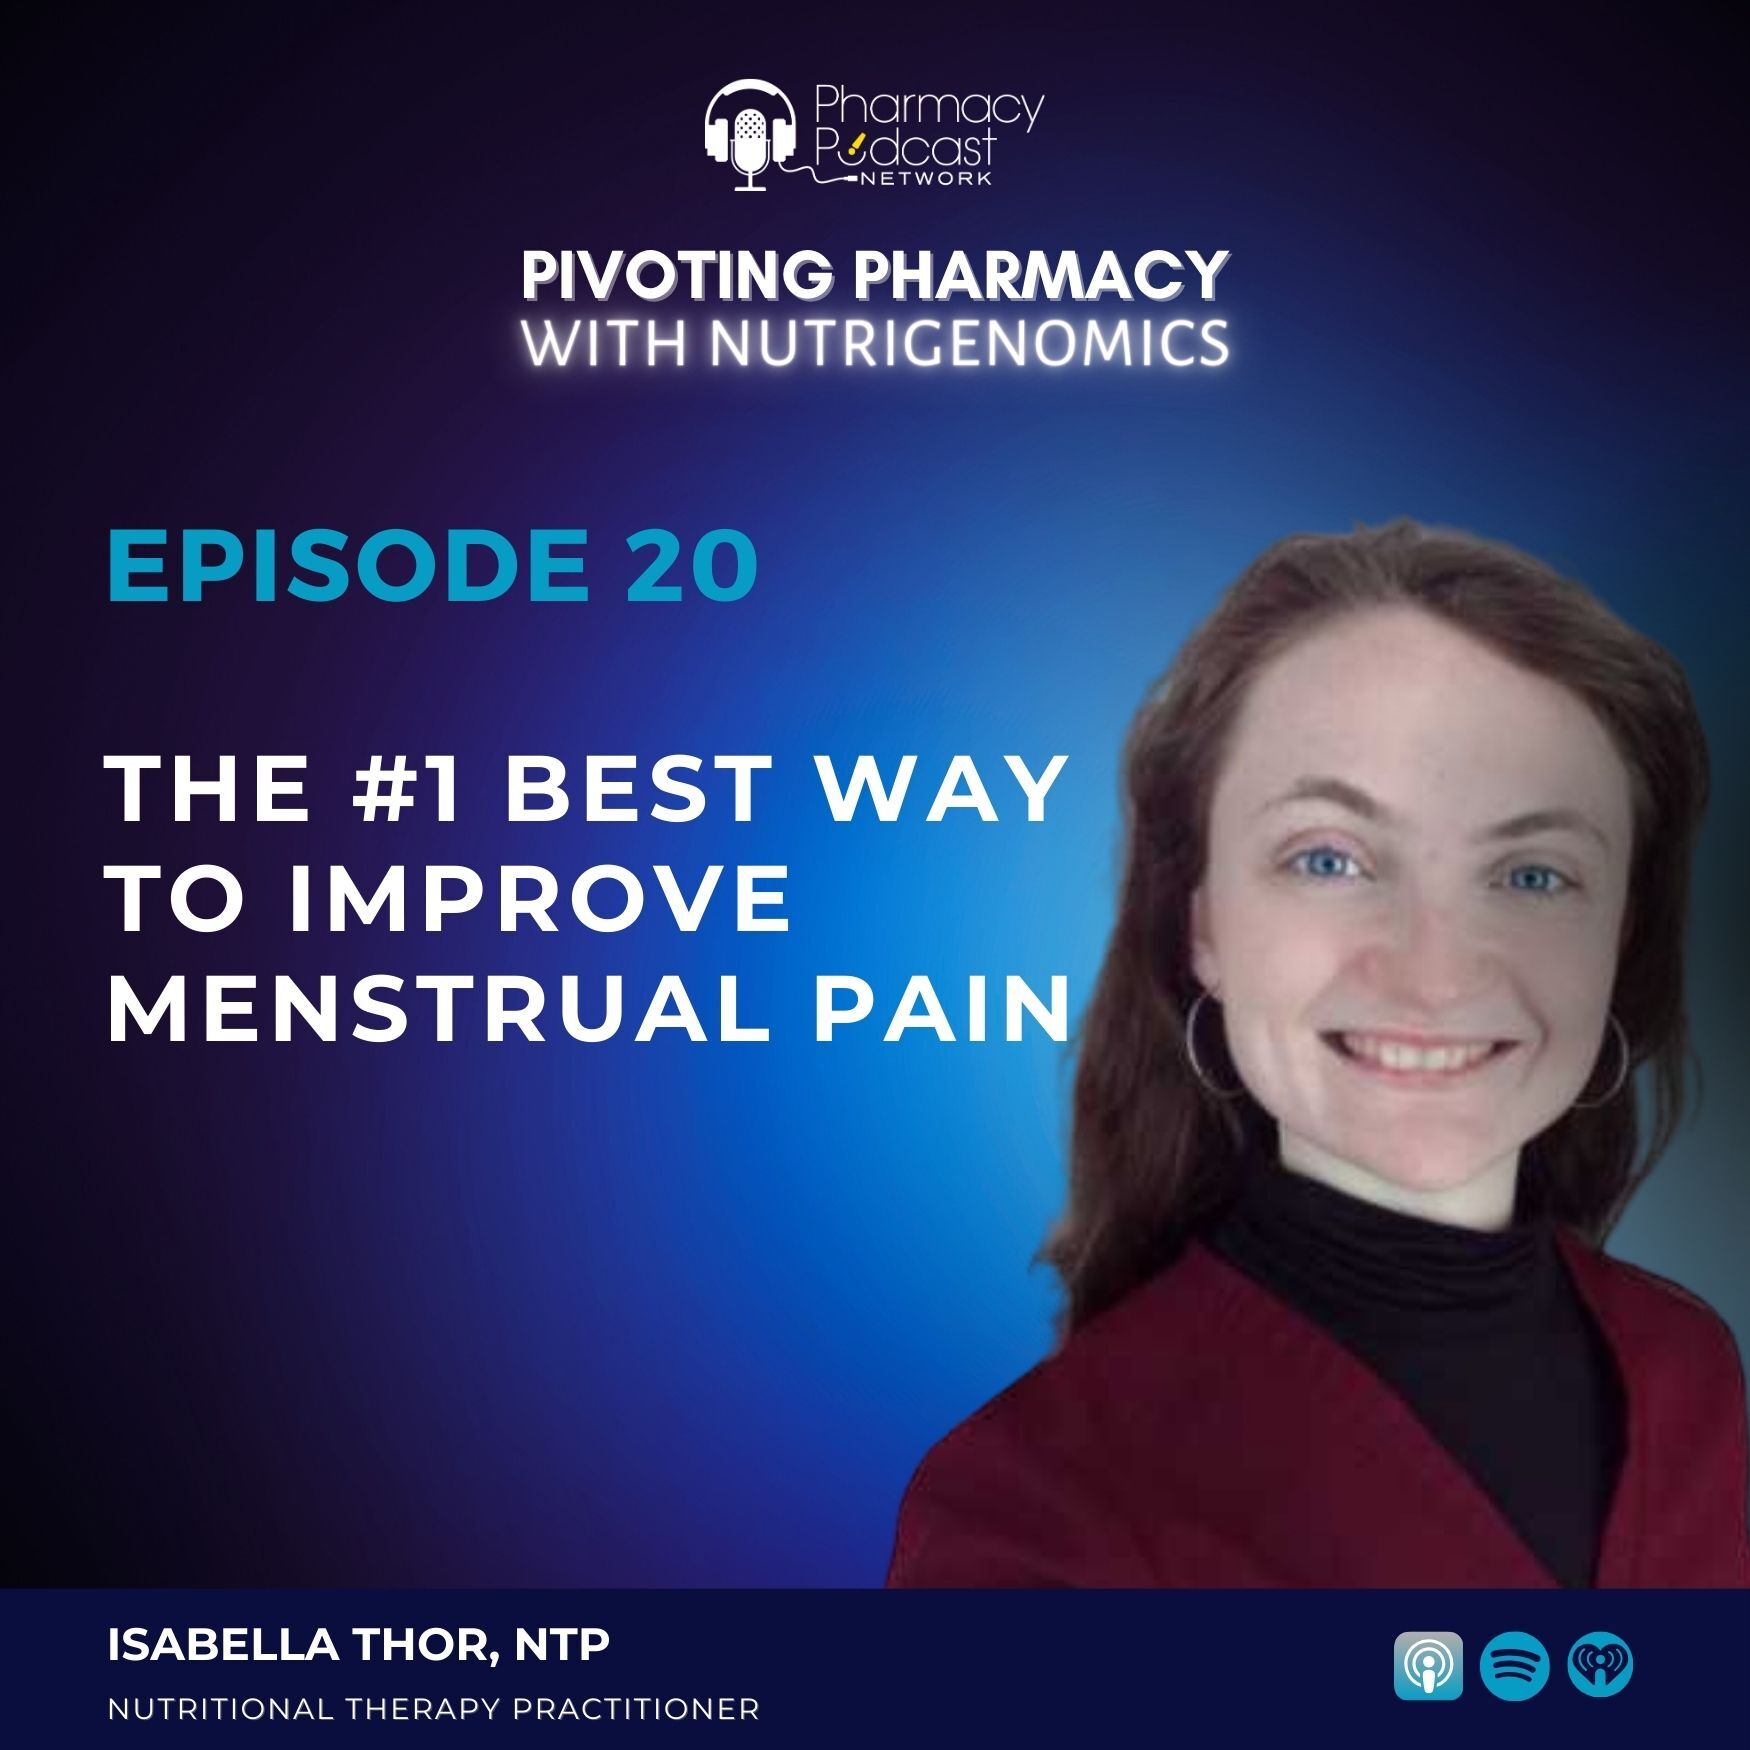 The #1 Best Way To Improve Menstrual Pain | Pivoting Pharmacy With Nutrigenomics